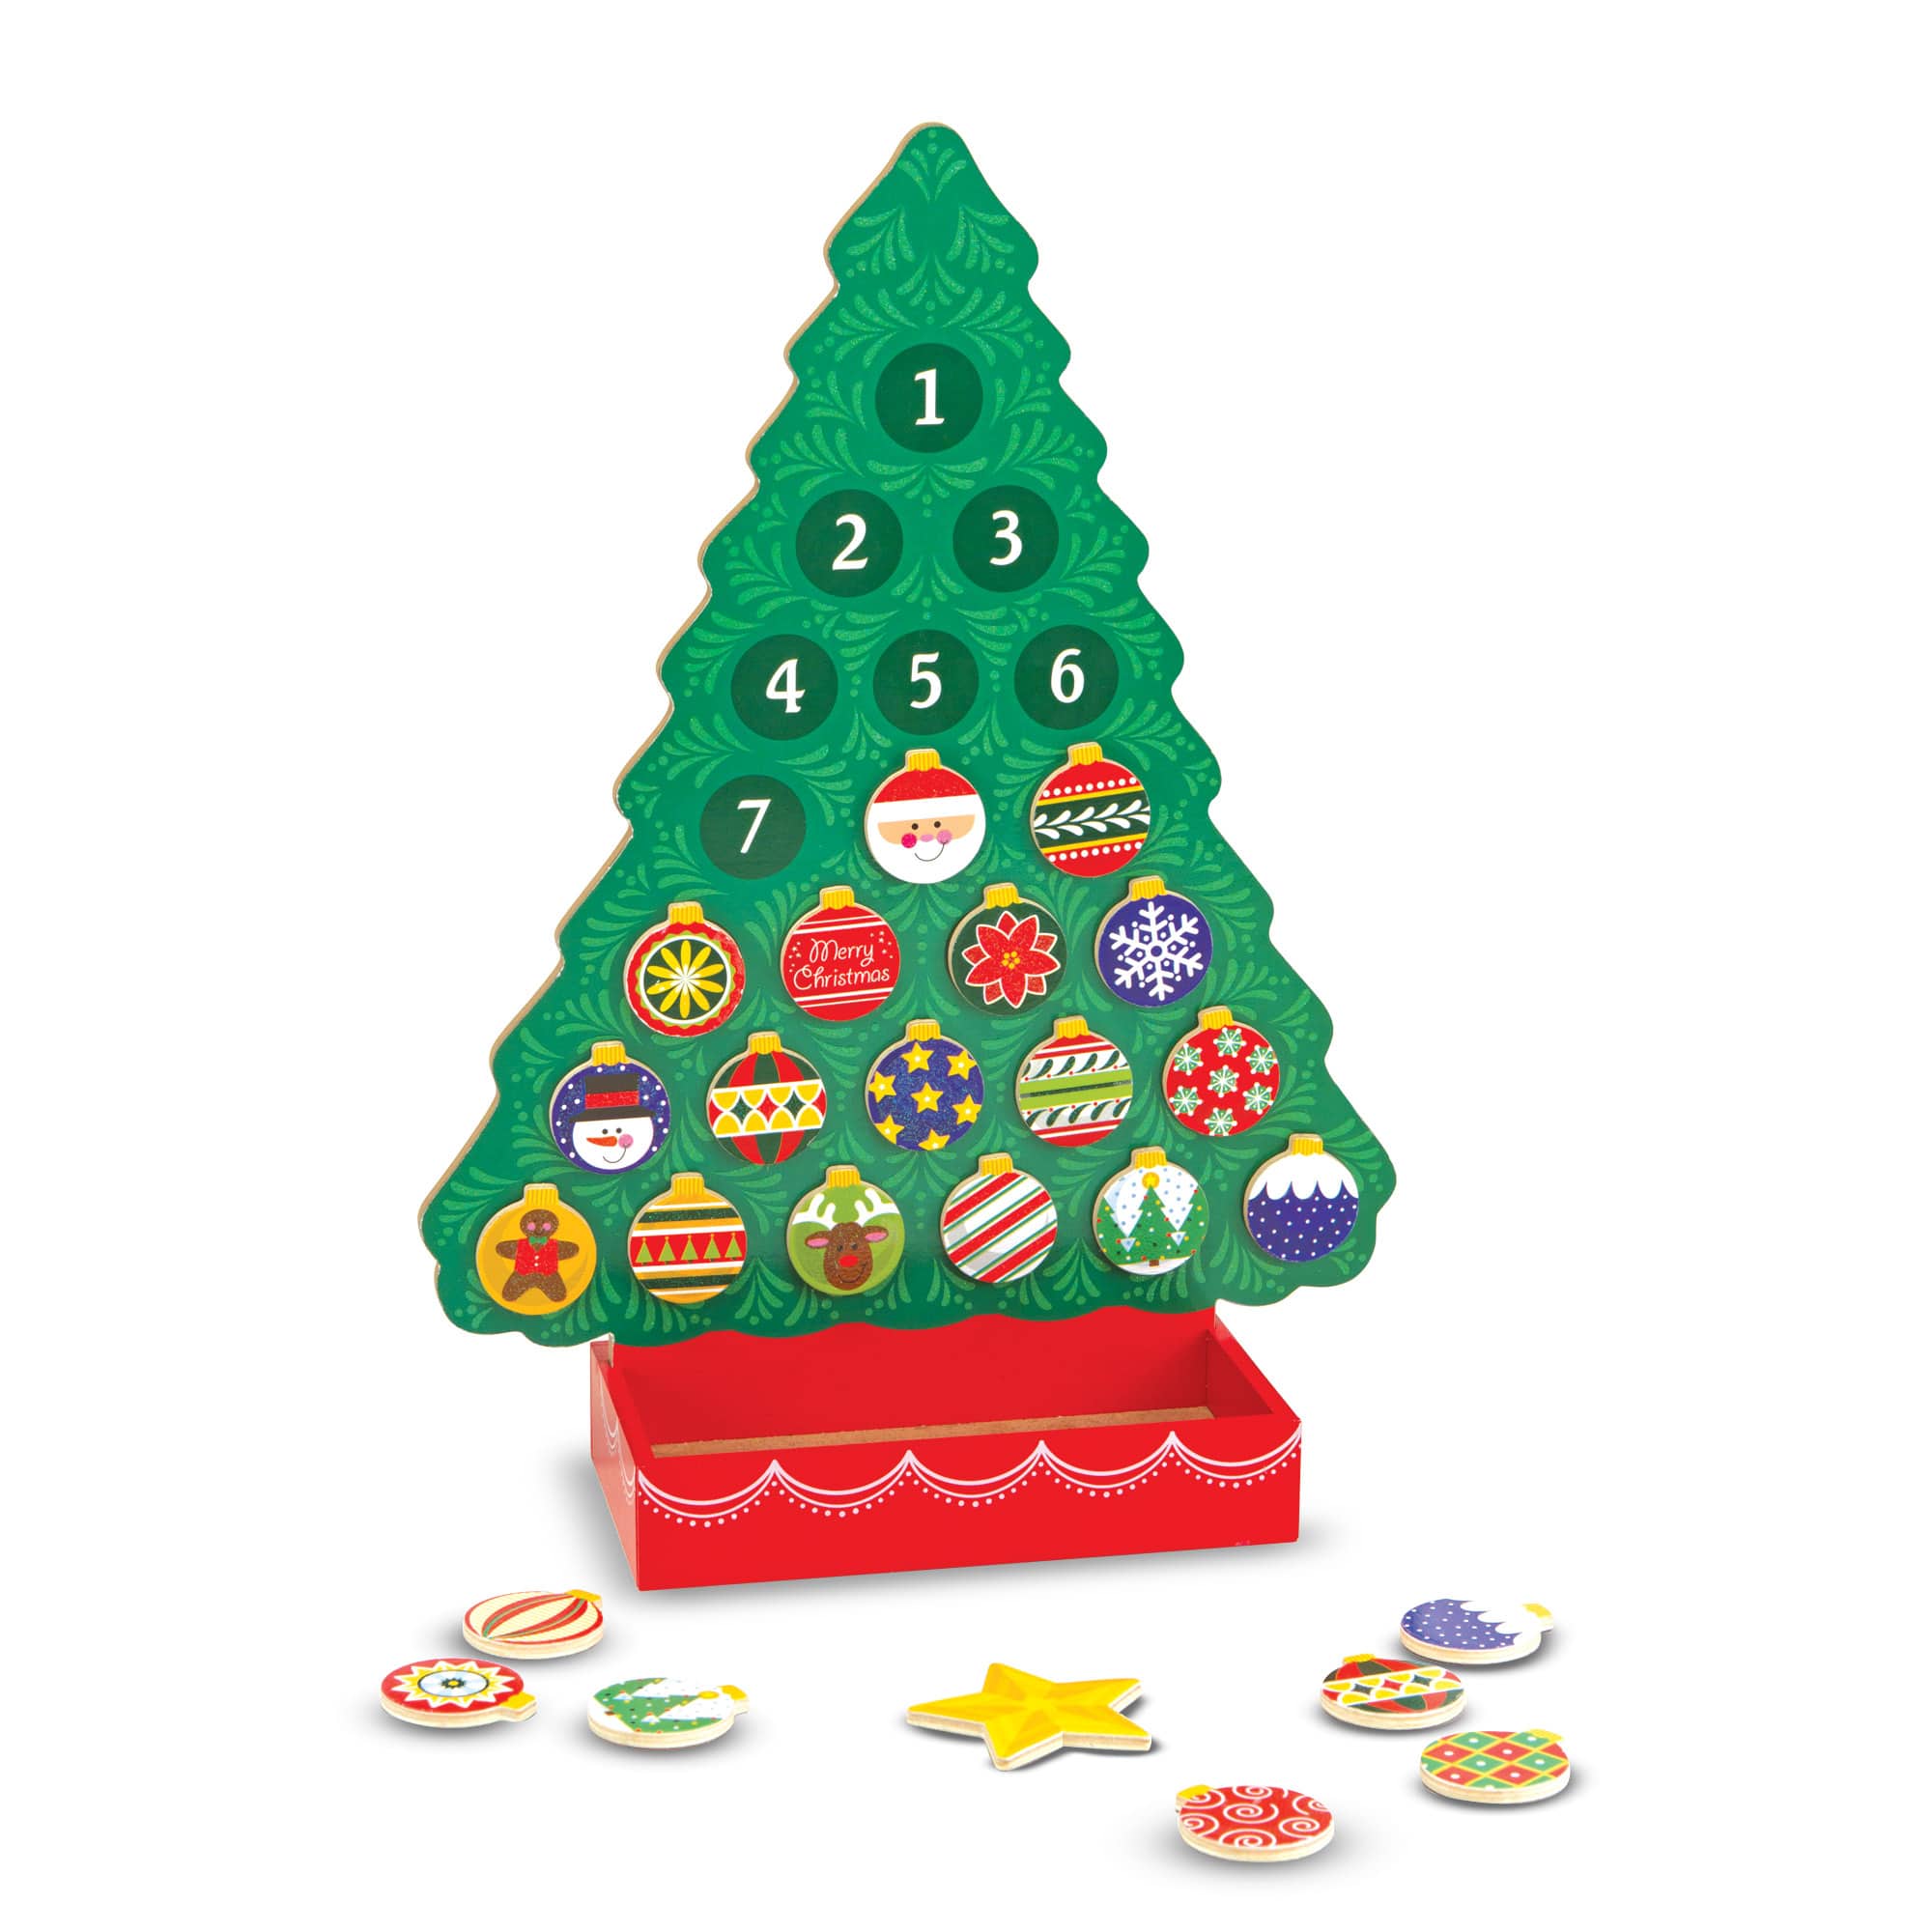 GAMES & ADVENT. COLORING PAD - Toys & Co. - Melissa & Doug